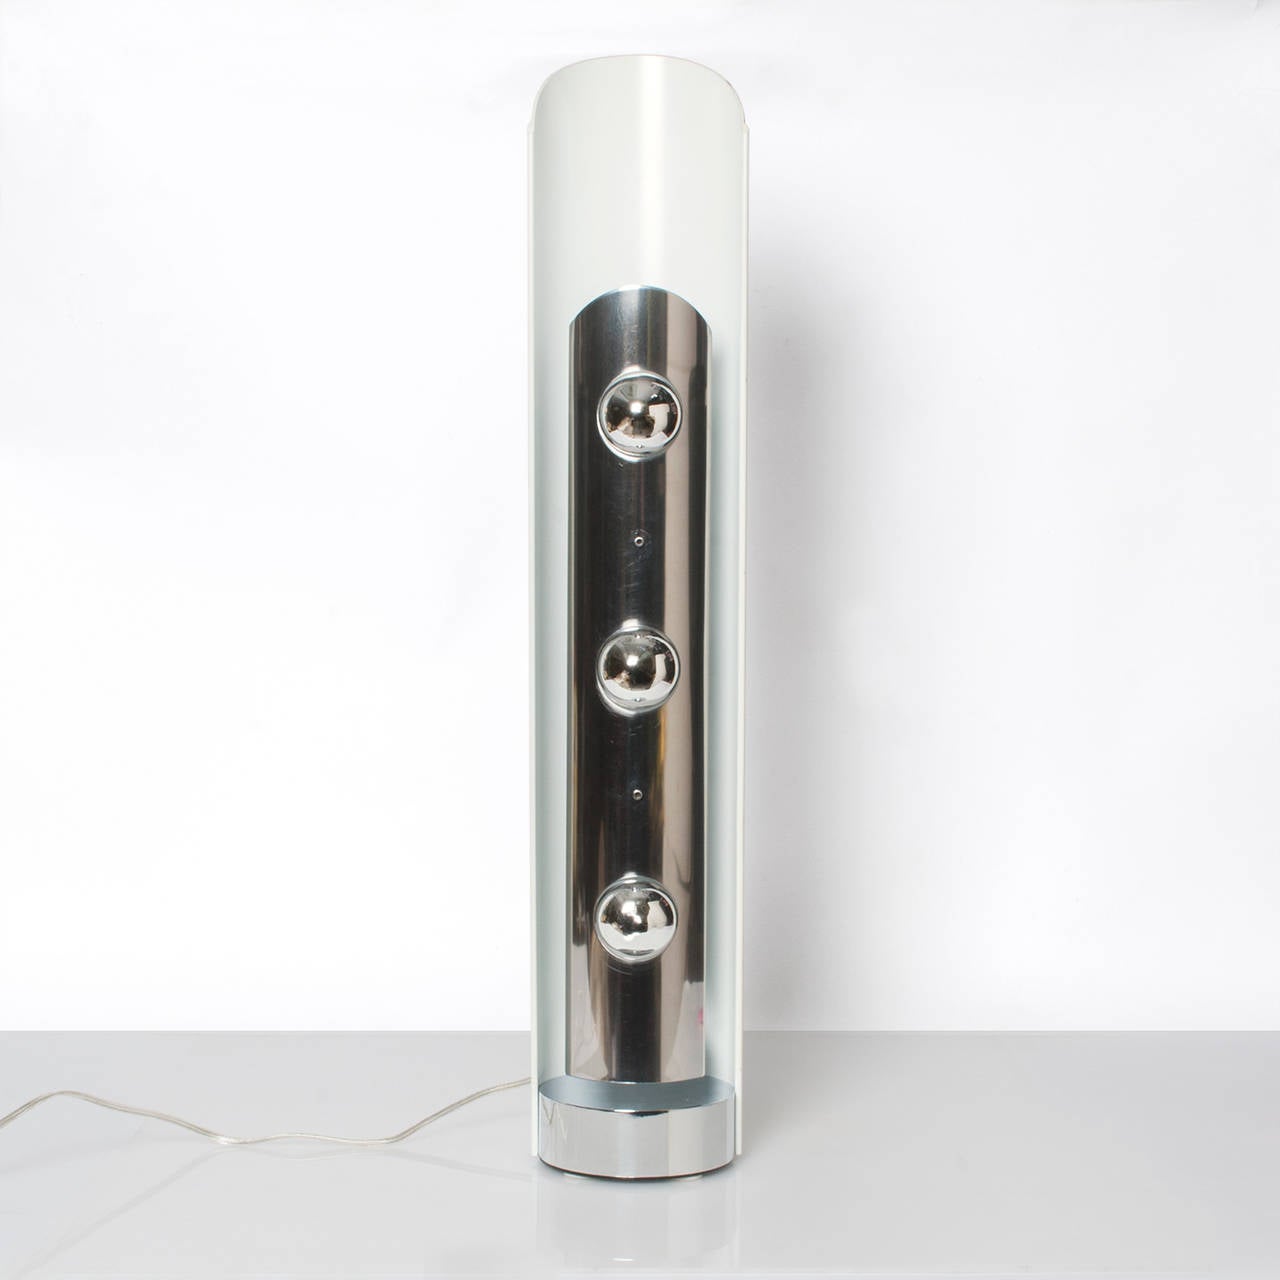 European (probably Italian) 3 light cylindrical table / floor lamp with chrome, polished steel and lacquered metal. The lamp uses 3 half chromed bulbs which reflect light into the white curved back. In the style of Arredoluce or Stilnovo but origin